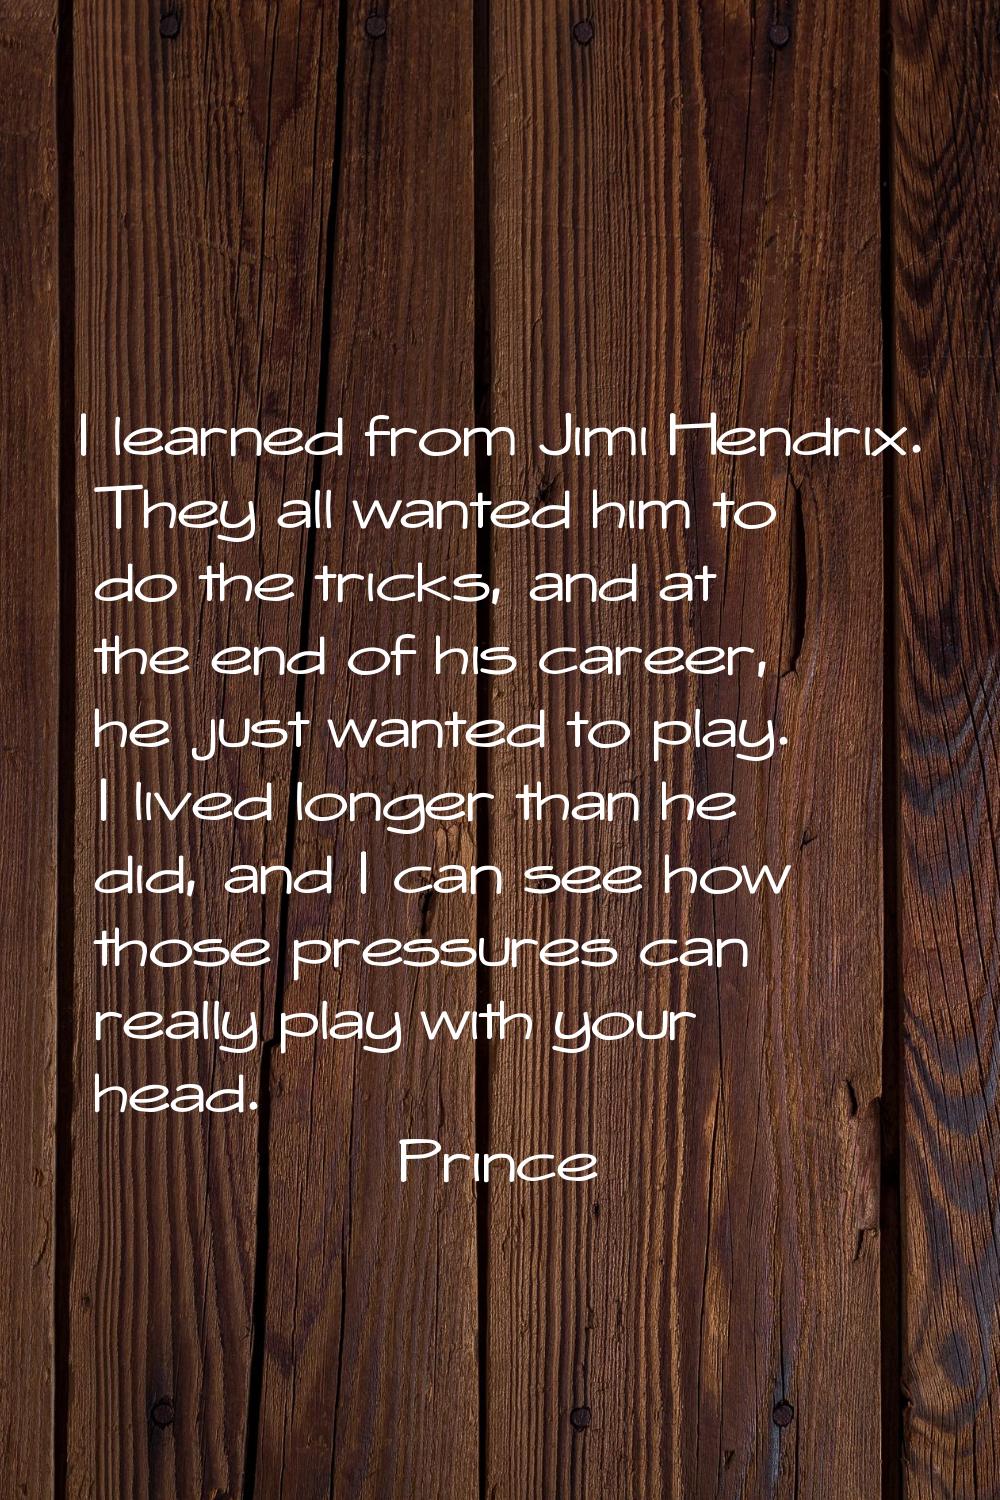 I learned from Jimi Hendrix. They all wanted him to do the tricks, and at the end of his career, he